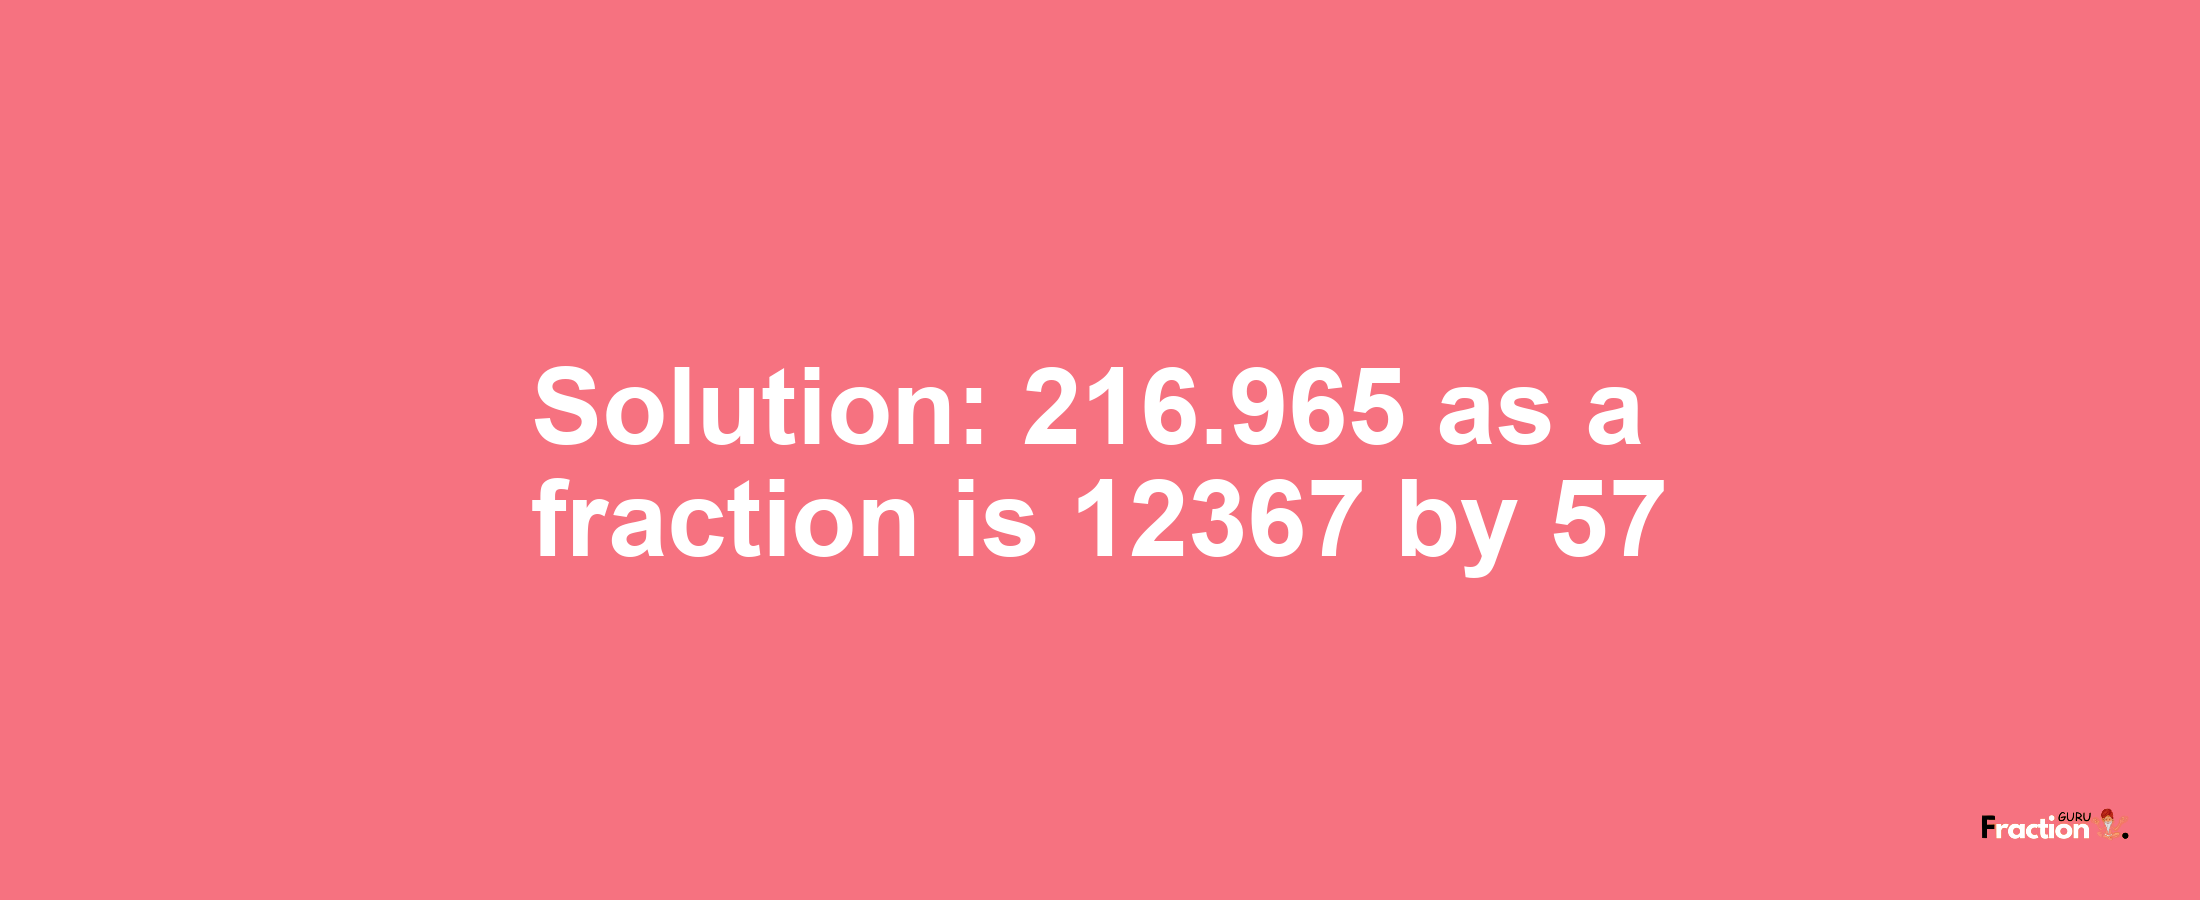 Solution:216.965 as a fraction is 12367/57